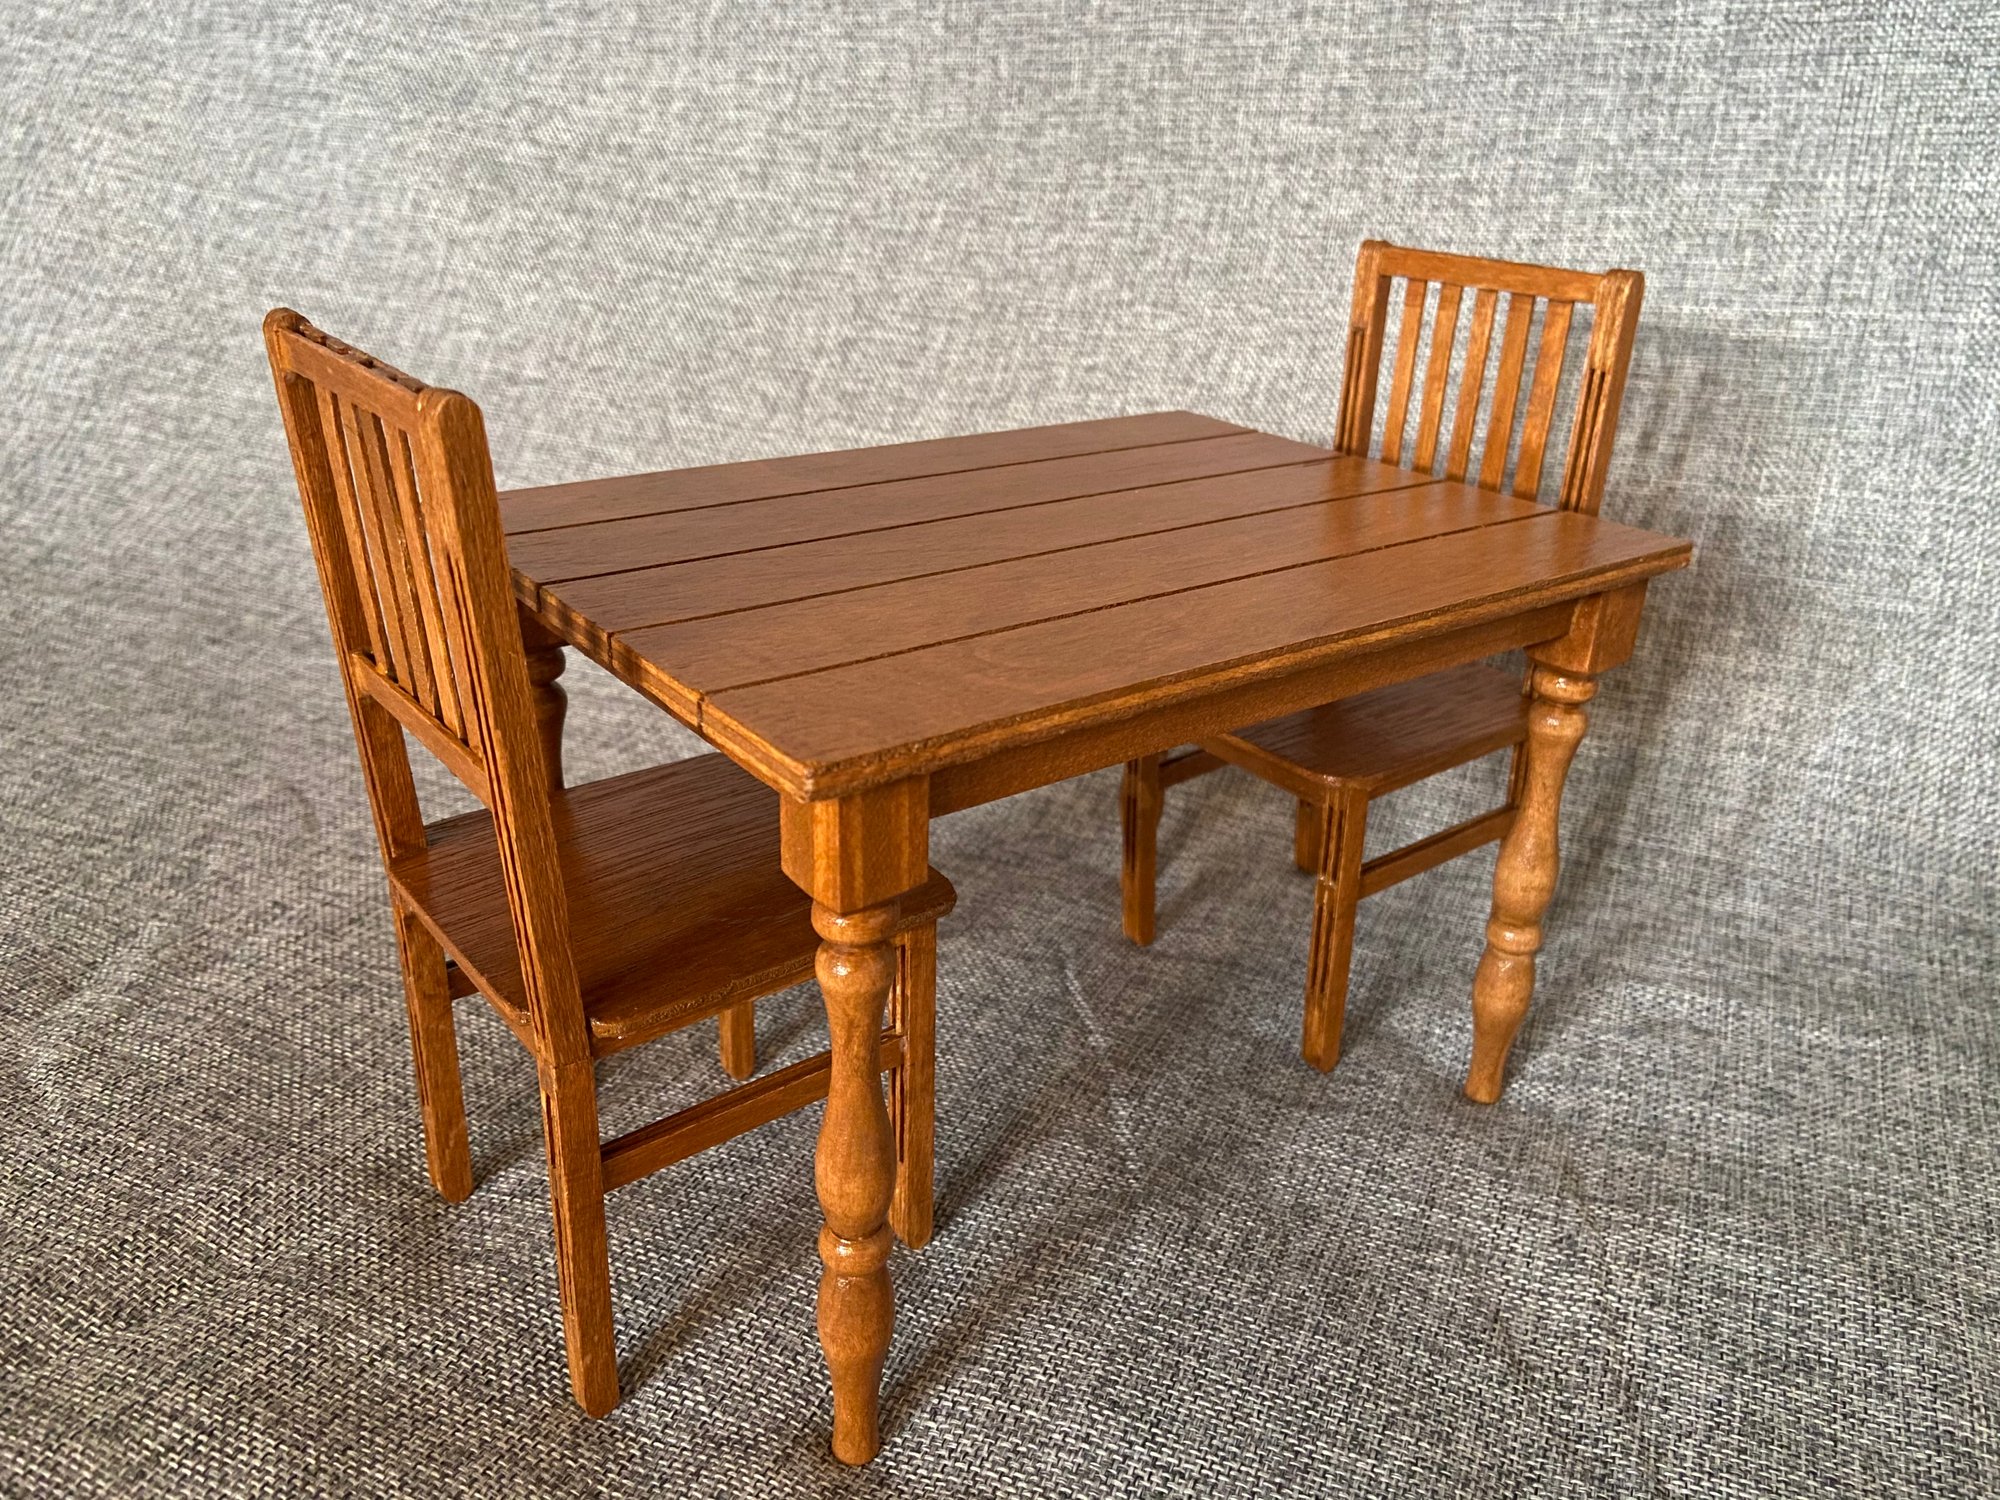 1 6 Scale Table And 2 Chairs Dining Set, Pecan Wood Dining Room Chairs